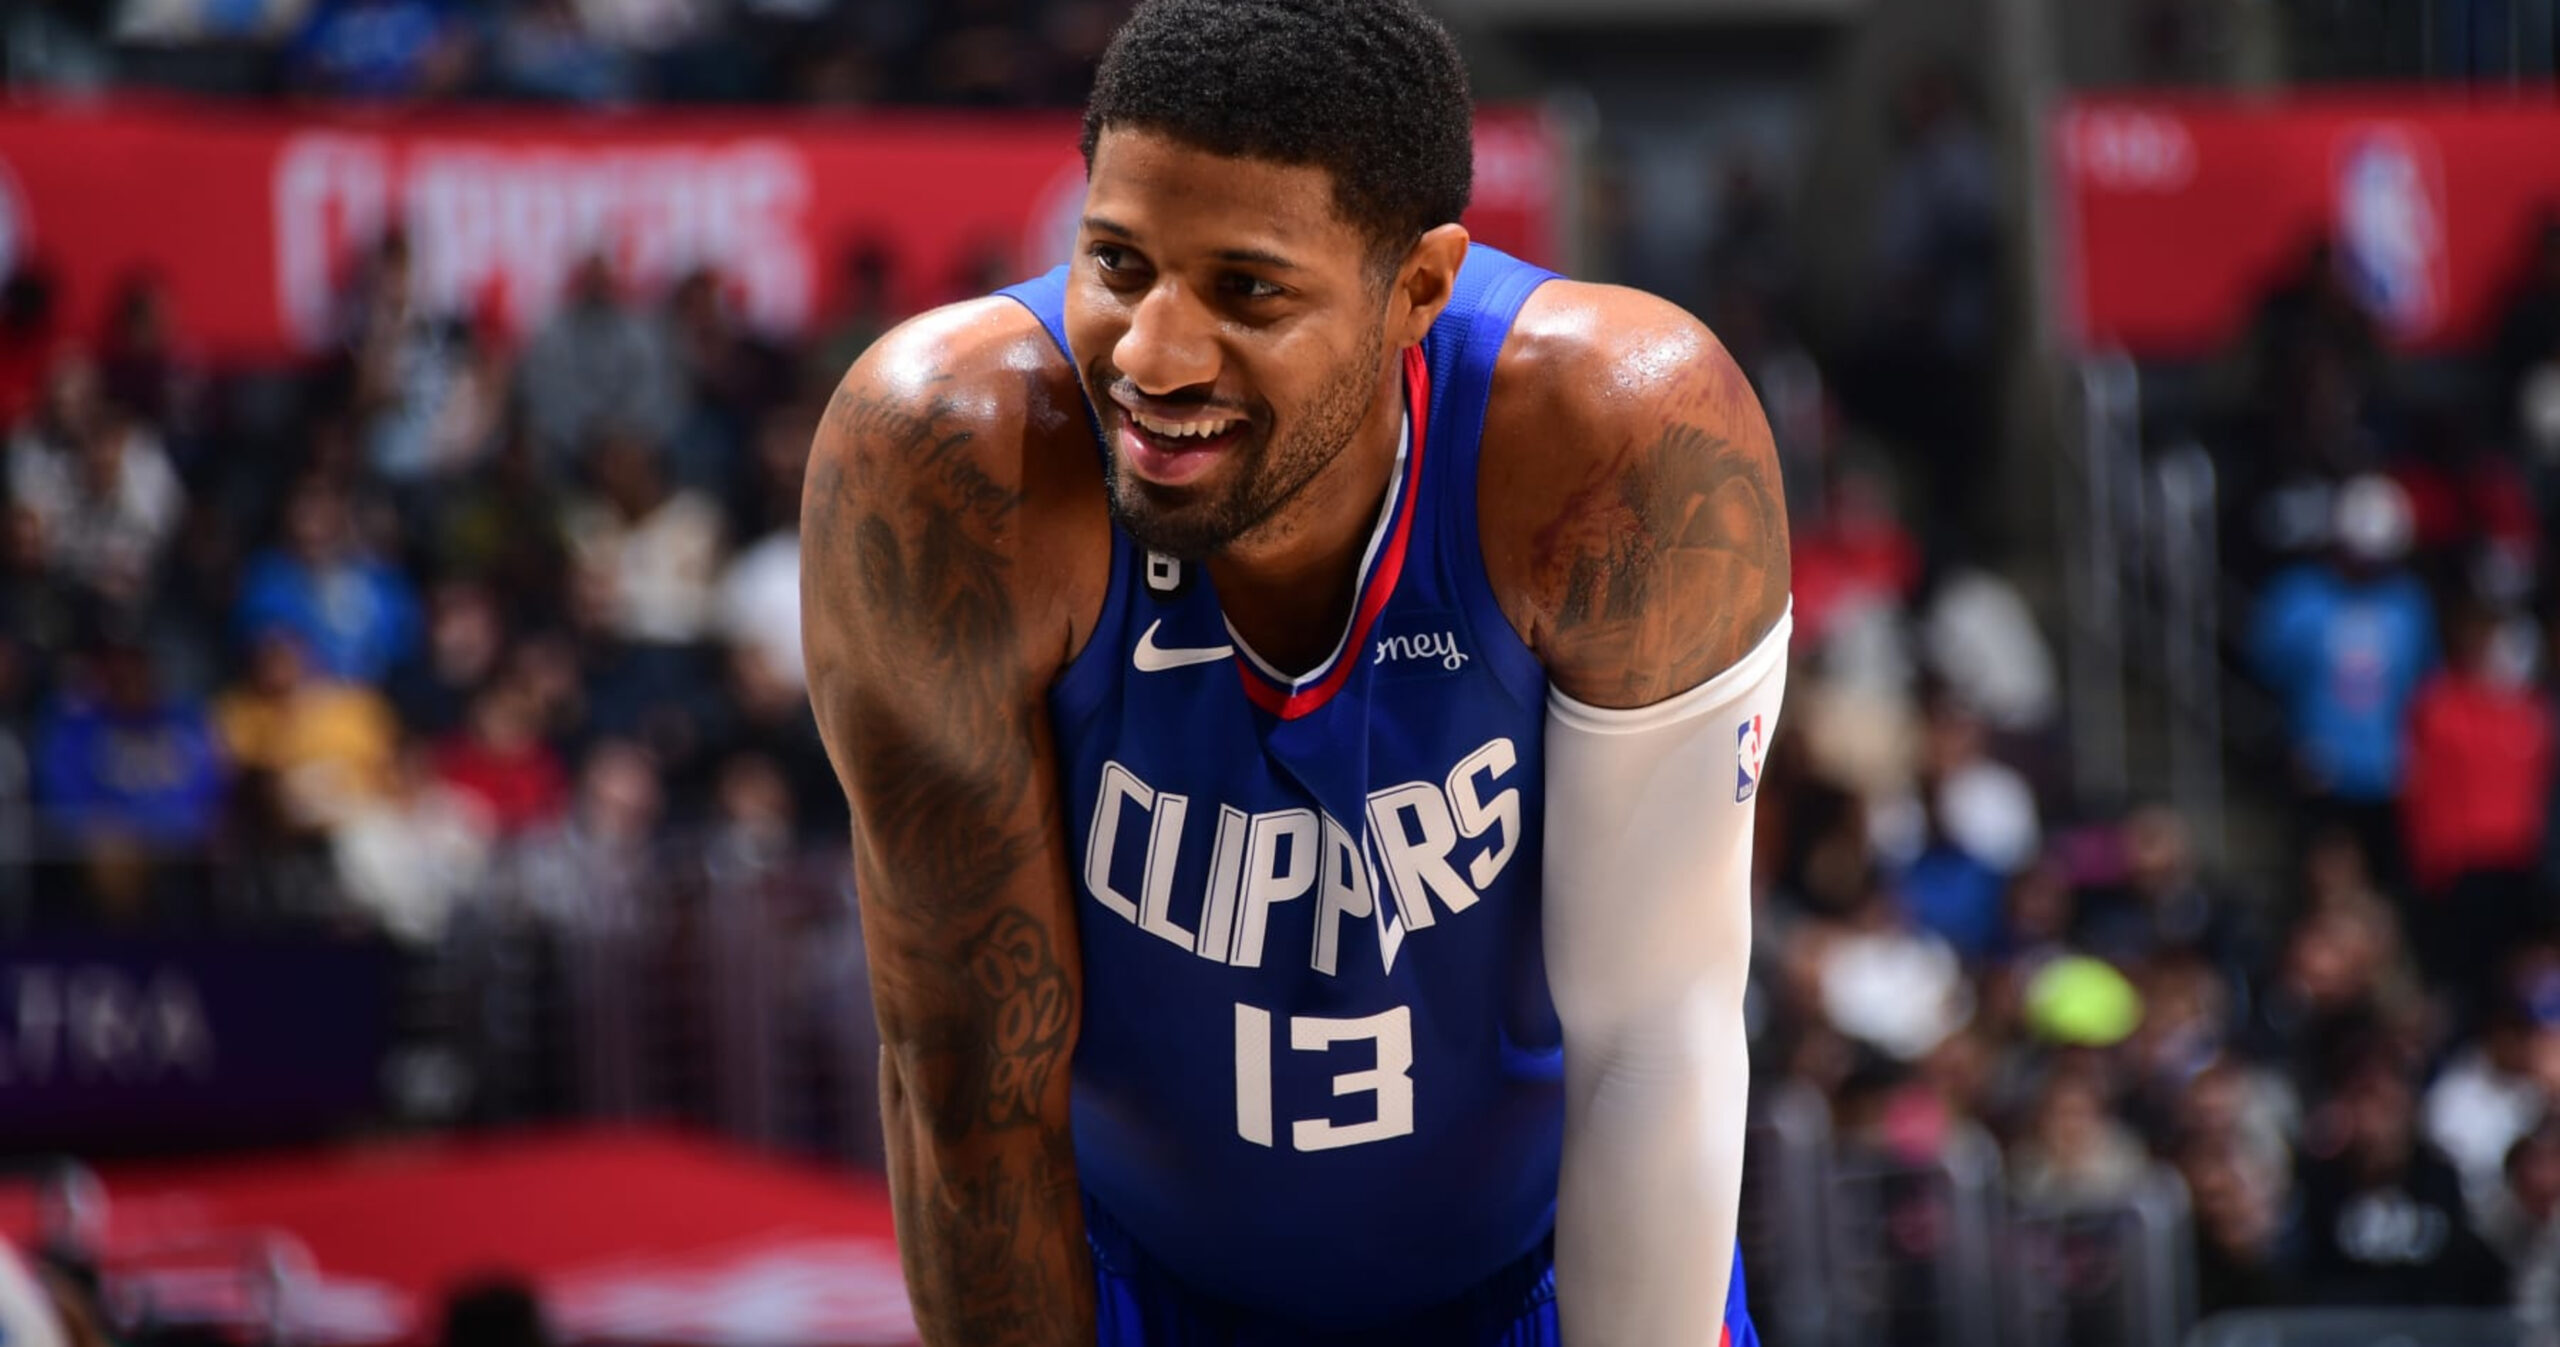 NBA News: "Paul George's rhythm, Kawhi Leonard's strength" - Marcus Smart detailed the torturous task of guarding the Los Angeles Clippers duo